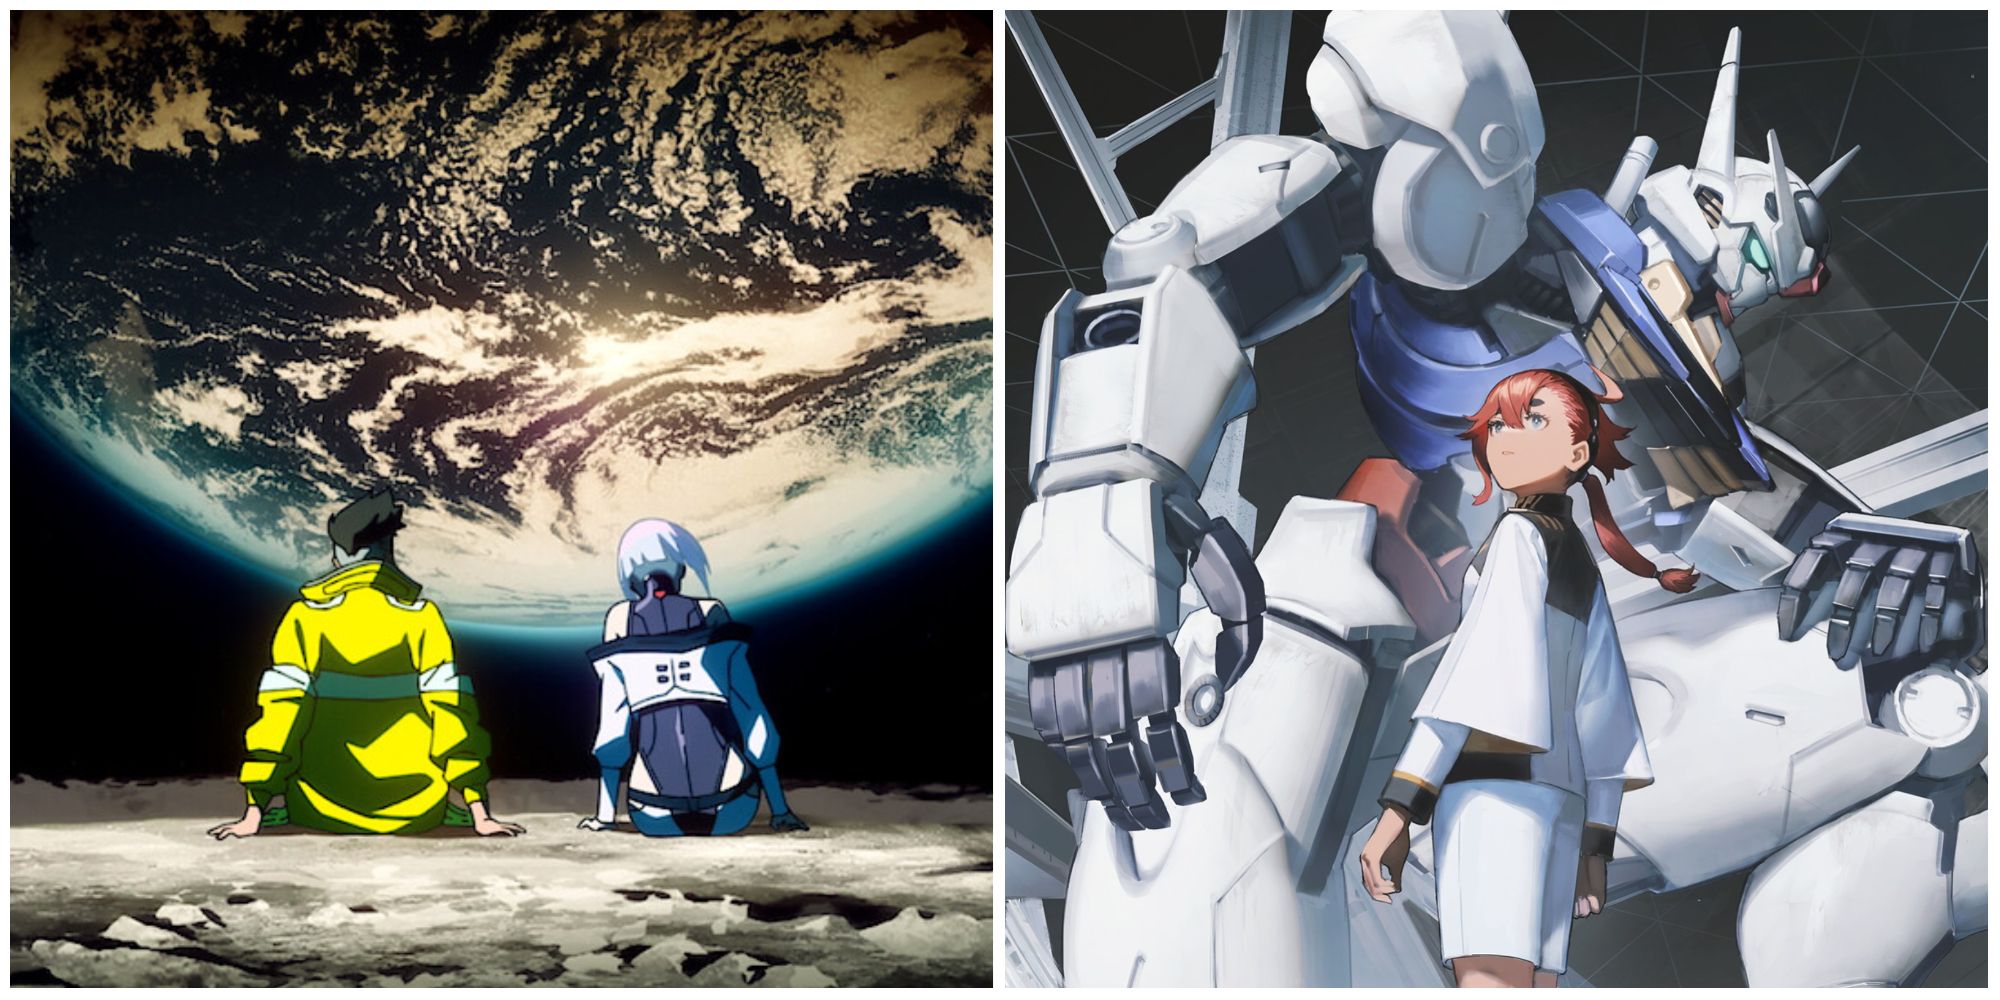 Top 3 Netflix anime sci-fi shows to watch in January 2022